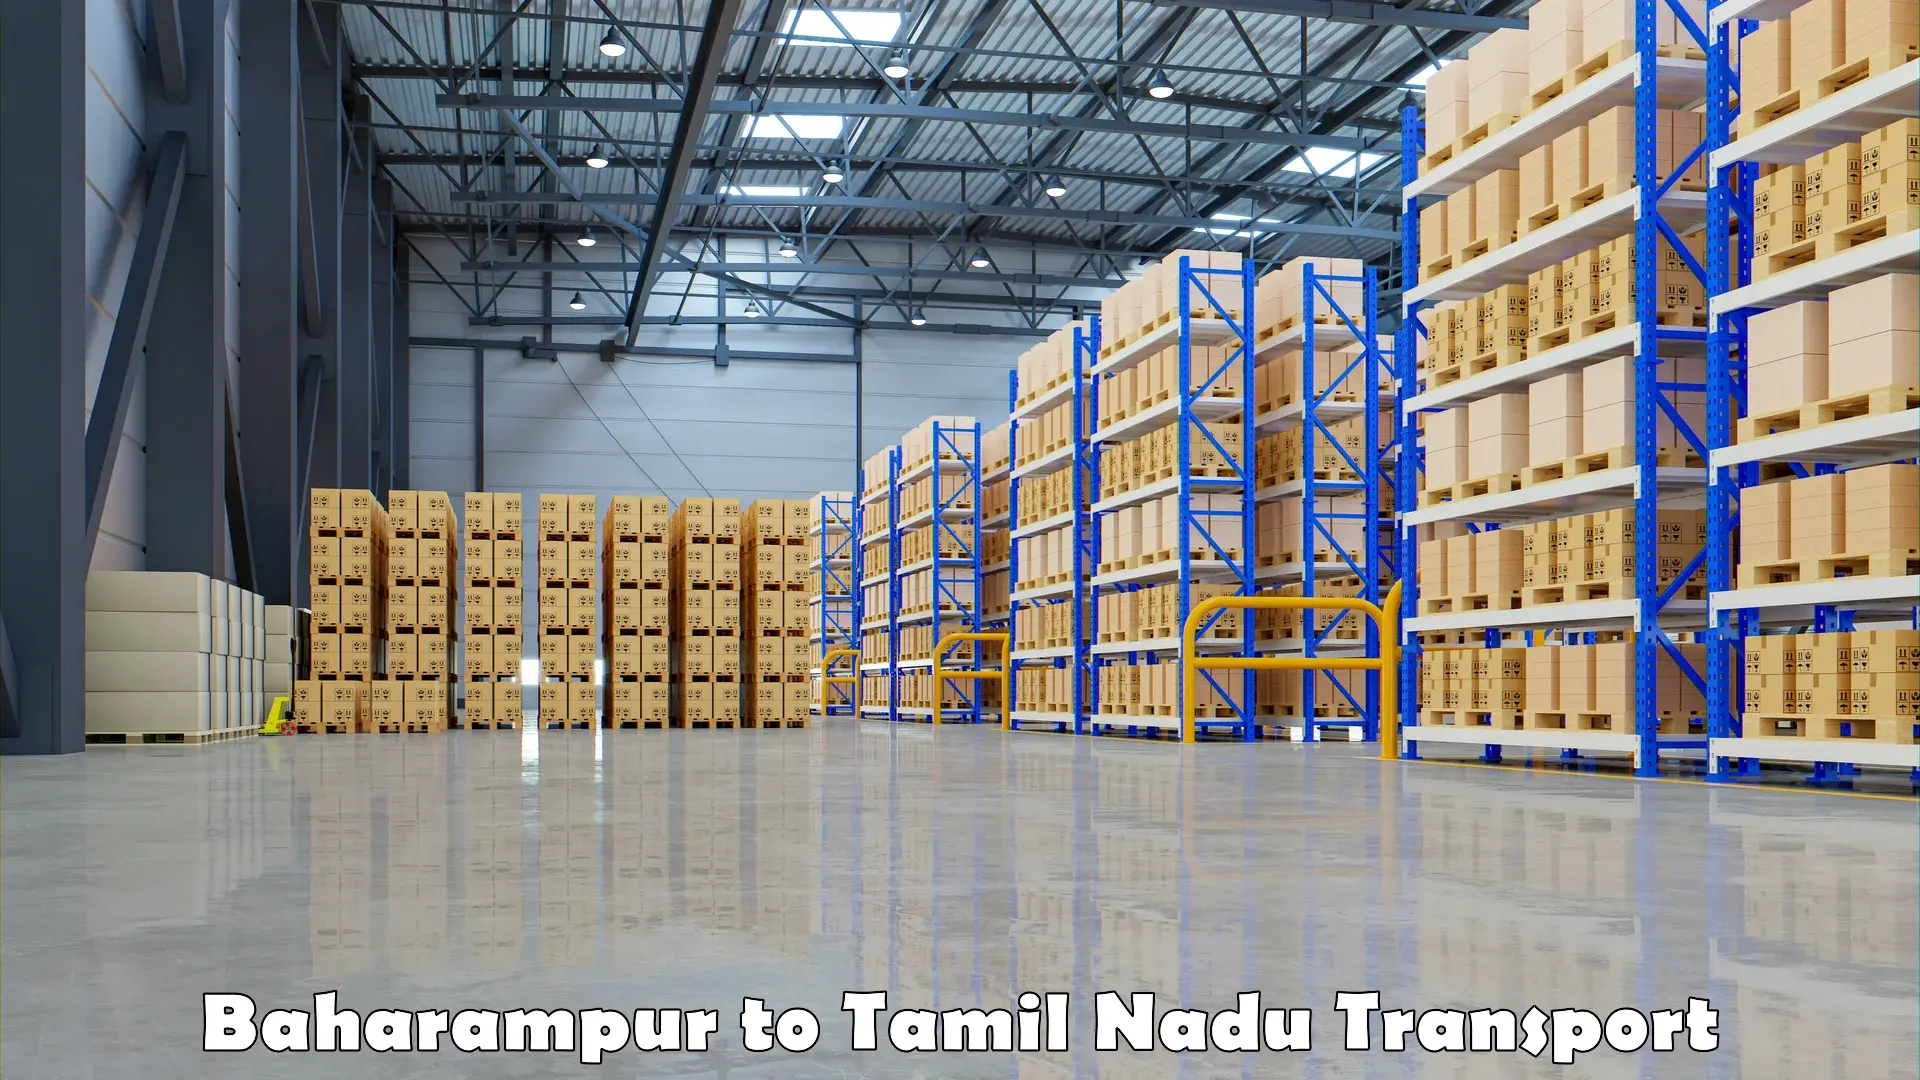 Container transport service Baharampur to Chennai Port